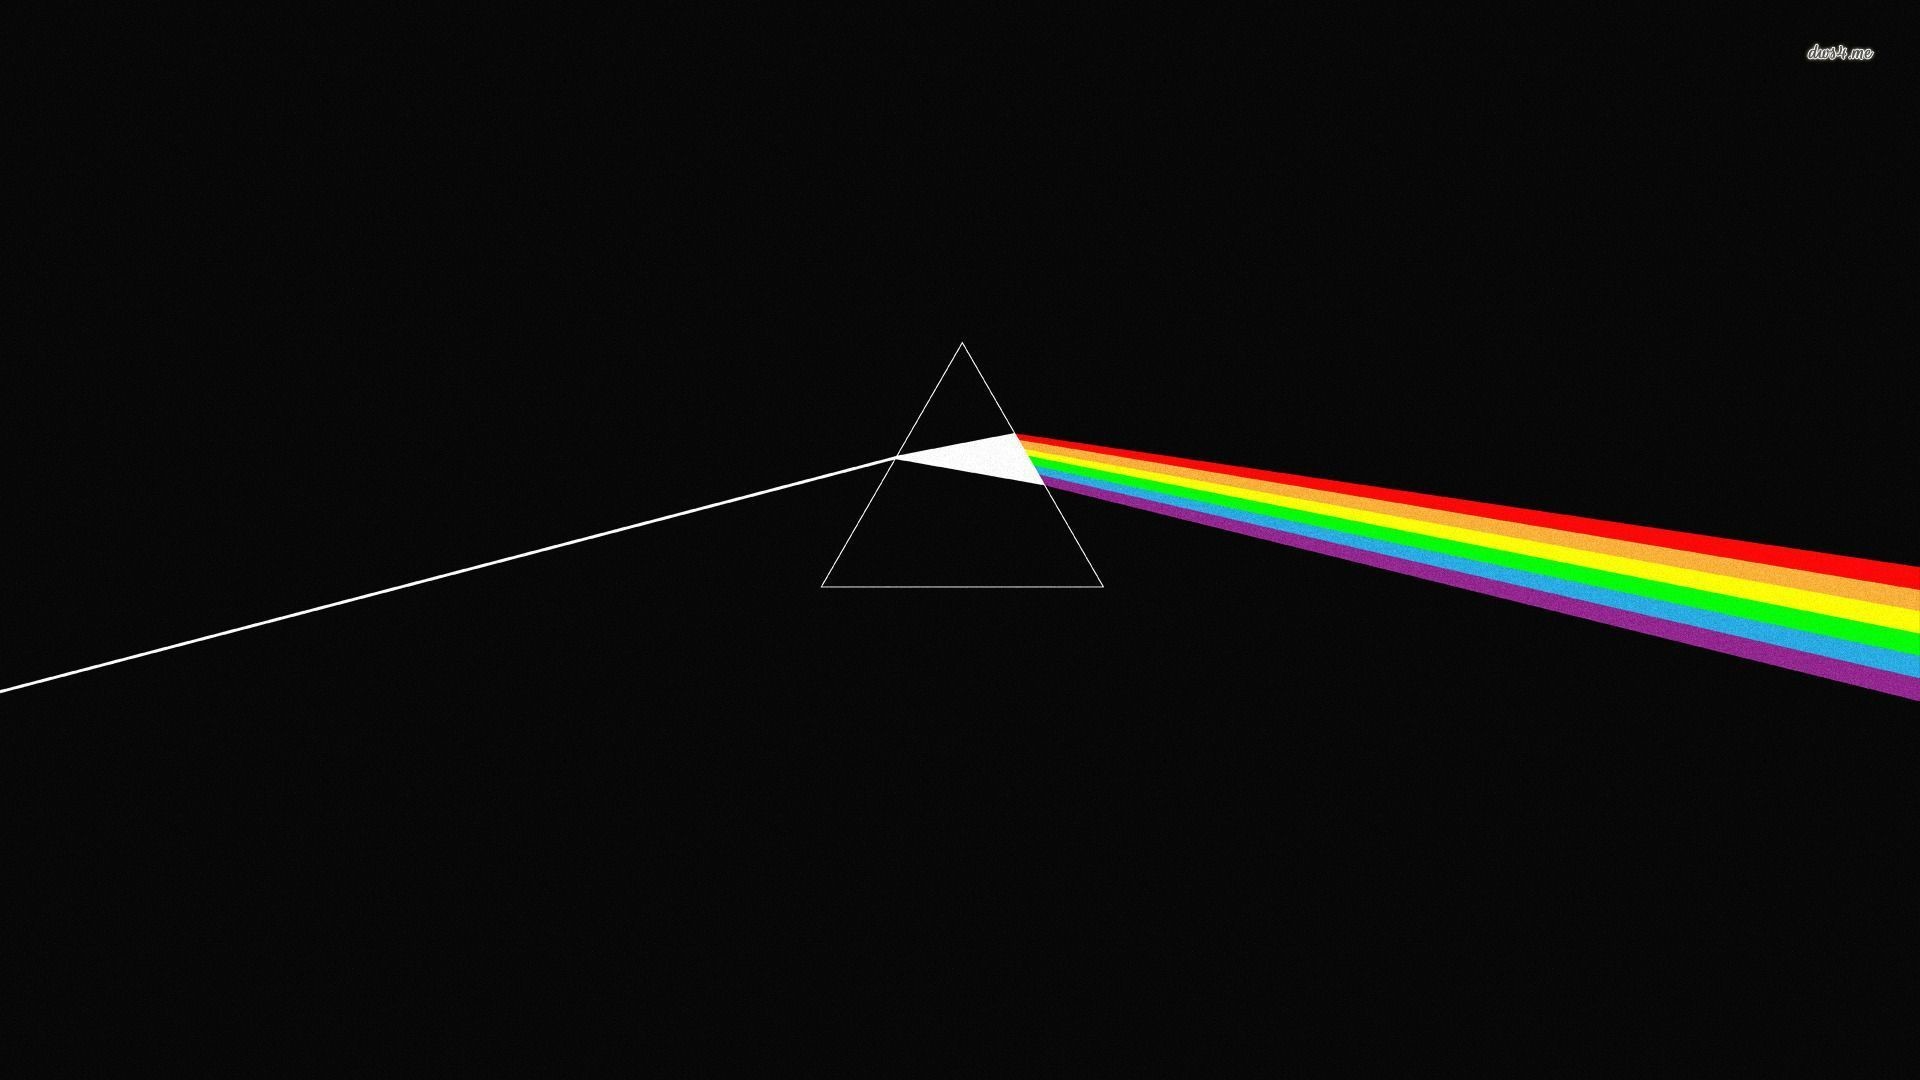 1920x1080 Pink Floyd Wallpapers for Iphone 7 Iphone 7 plus Iphone